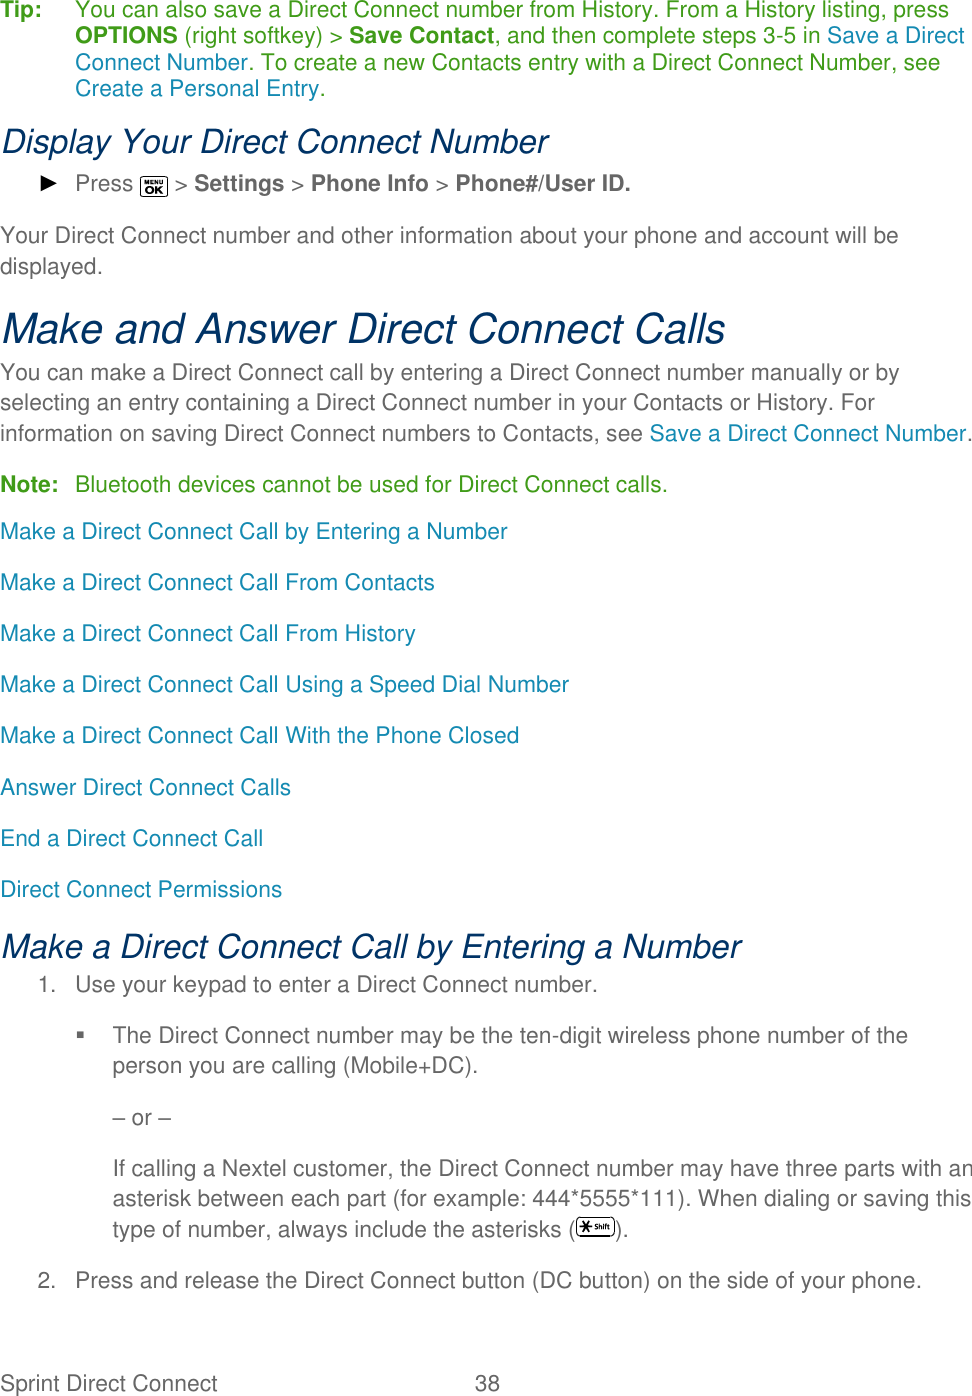  Sprint Direct Connect  38   Tip:   You can also save a Direct Connect number from History. From a History listing, press OPTIONS (right softkey) &gt; Save Contact, and then complete steps 3-5 in Save a Direct Connect Number. To create a new Contacts entry with a Direct Connect Number, see Create a Personal Entry. Display Your Direct Connect Number ► Press   &gt; Settings &gt; Phone Info &gt; Phone#/User ID. Your Direct Connect number and other information about your phone and account will be displayed. Make and Answer Direct Connect Calls You can make a Direct Connect call by entering a Direct Connect number manually or by selecting an entry containing a Direct Connect number in your Contacts or History. For information on saving Direct Connect numbers to Contacts, see Save a Direct Connect Number. Note:  Bluetooth devices cannot be used for Direct Connect calls. Make a Direct Connect Call by Entering a Number Make a Direct Connect Call From Contacts Make a Direct Connect Call From History Make a Direct Connect Call Using a Speed Dial Number Make a Direct Connect Call With the Phone Closed Answer Direct Connect Calls End a Direct Connect Call Direct Connect Permissions Make a Direct Connect Call by Entering a Number 1.  Use your keypad to enter a Direct Connect number.   The Direct Connect number may be the ten-digit wireless phone number of the person you are calling (Mobile+DC). – or – If calling a Nextel customer, the Direct Connect number may have three parts with an asterisk between each part (for example: 444*5555*111). When dialing or saving this type of number, always include the asterisks ( ). 2.  Press and release the Direct Connect button (DC button) on the side of your phone. 